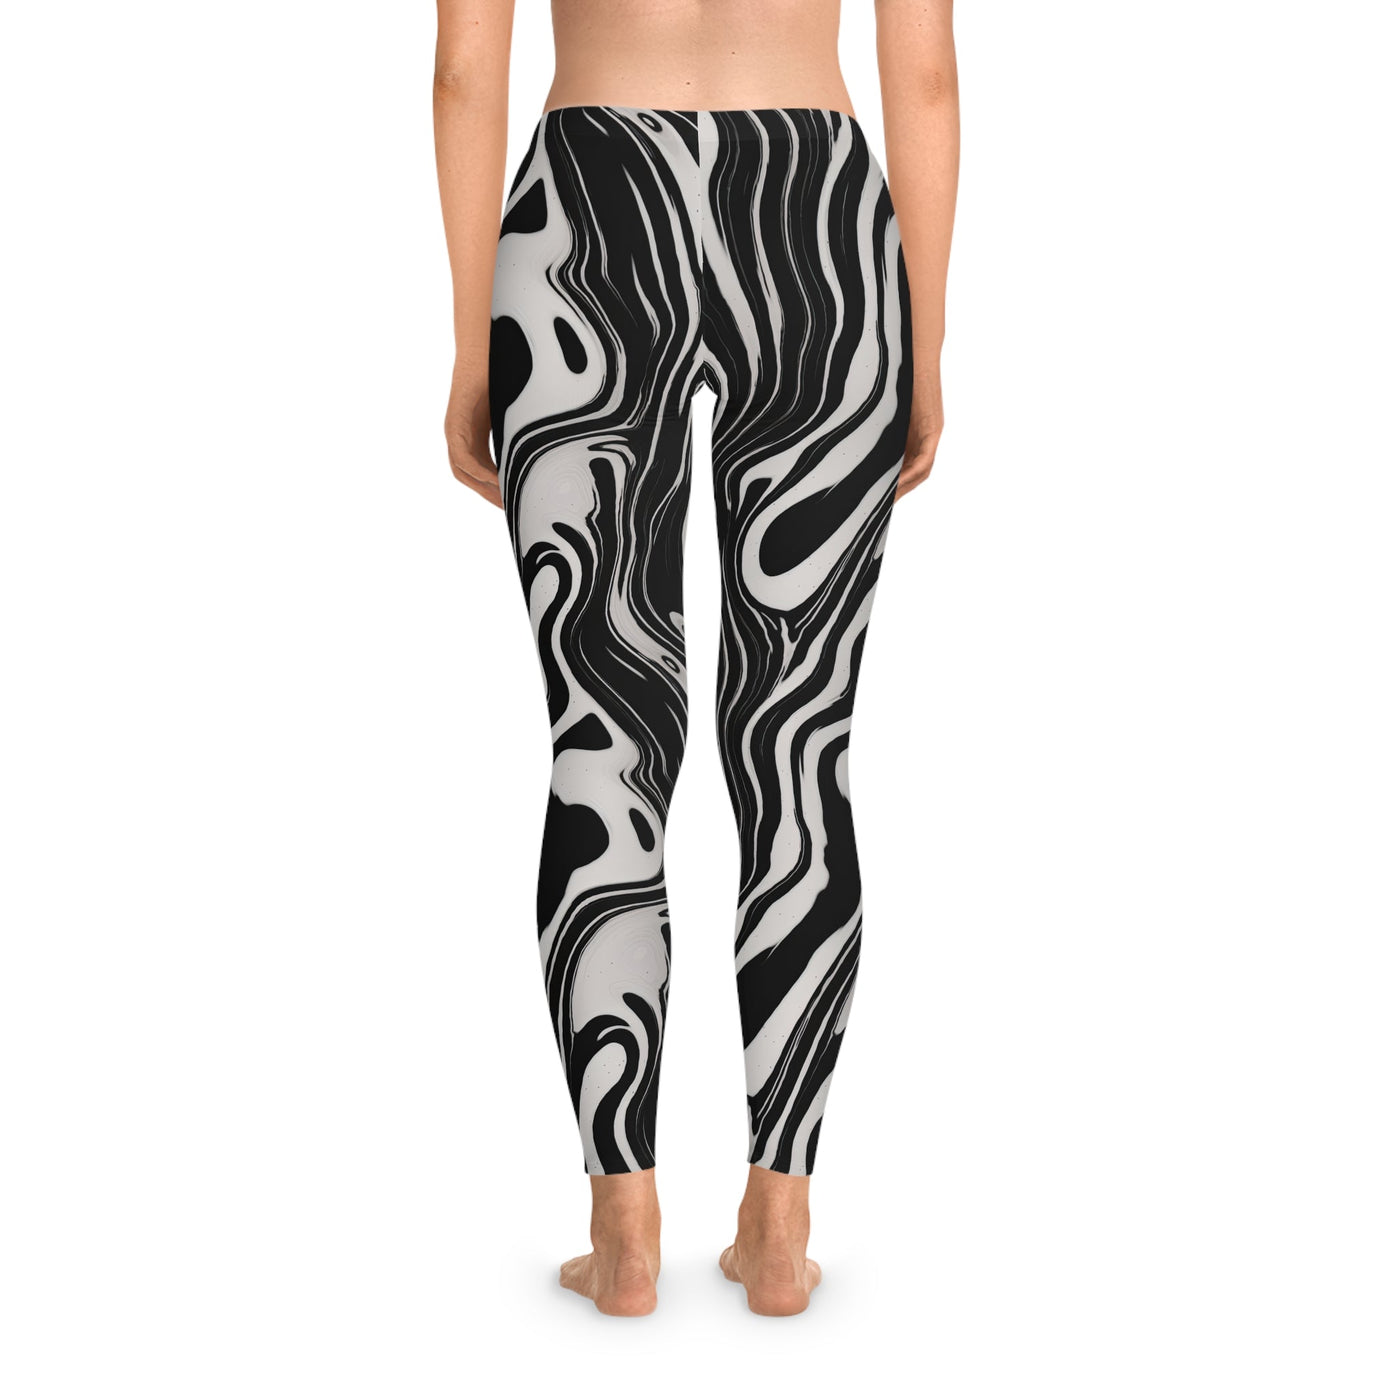 Wavy Black and White Ink Pattern Stretchy Leggings